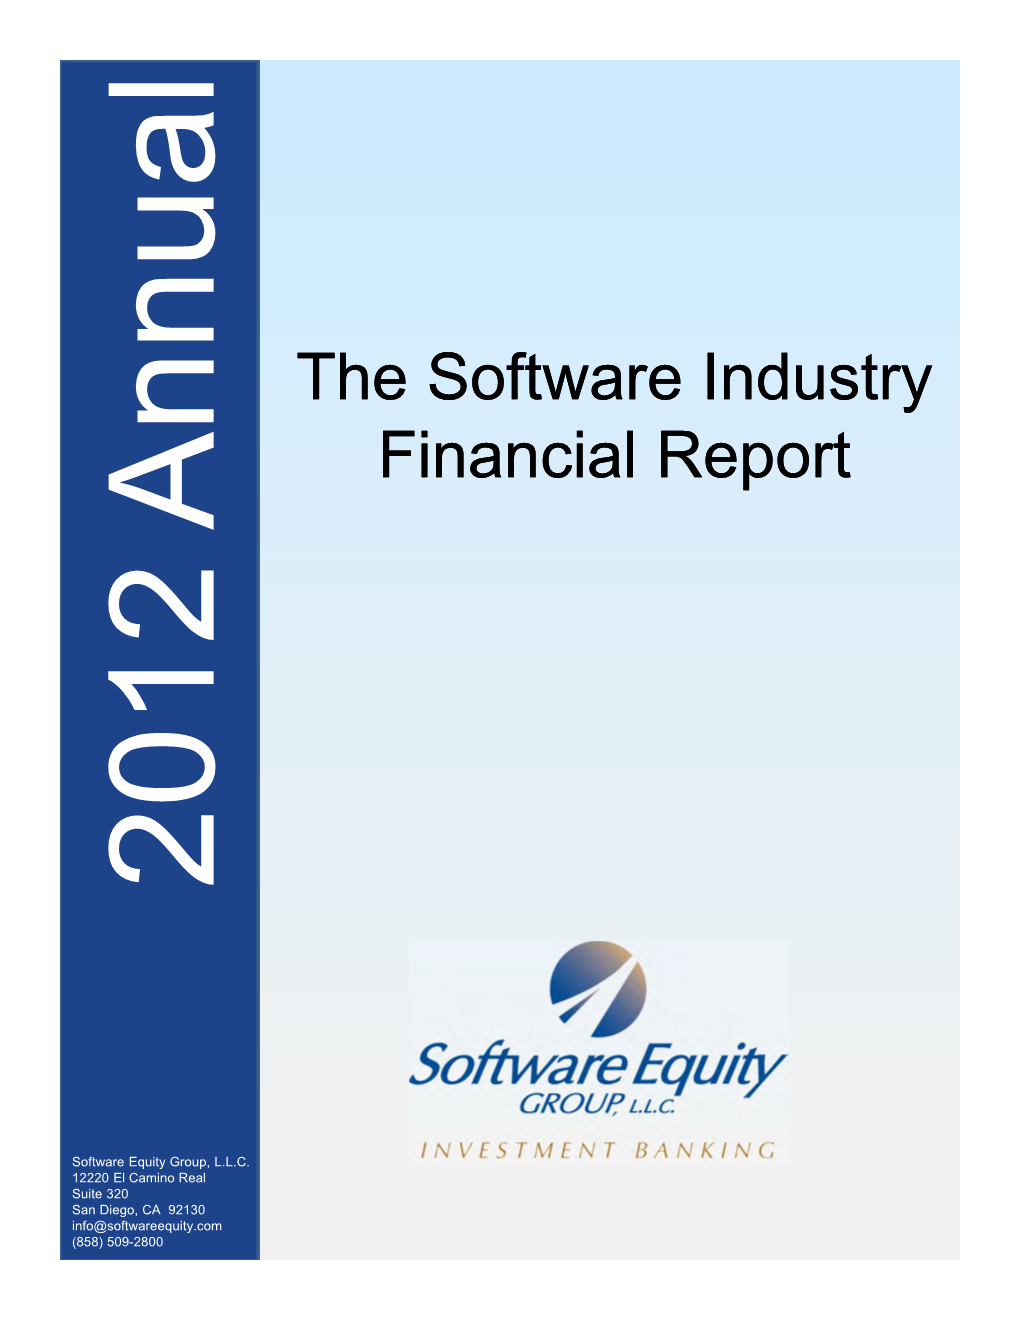 Software Equity Group's 2012 M&A Survey